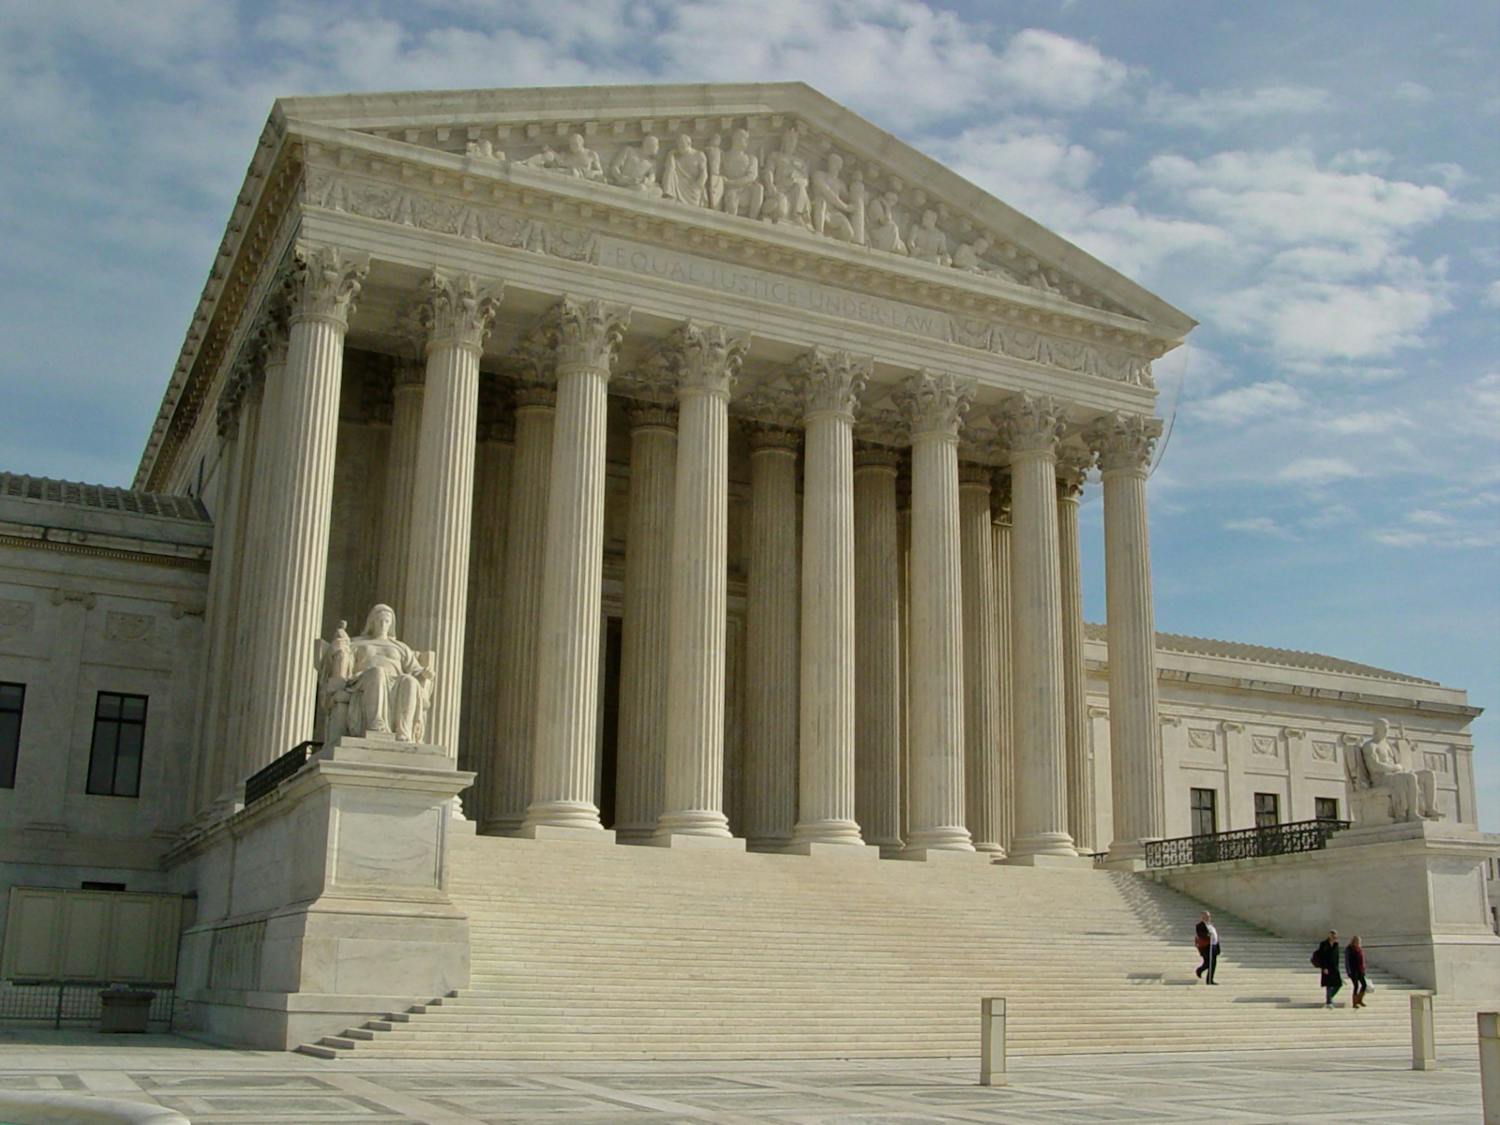 The Supreme Court has decided to take another affirmative action case, but this time the Court looks a little different (Flickr/”Supreme Court Building” by Ben Schumin, February 1, 2006).